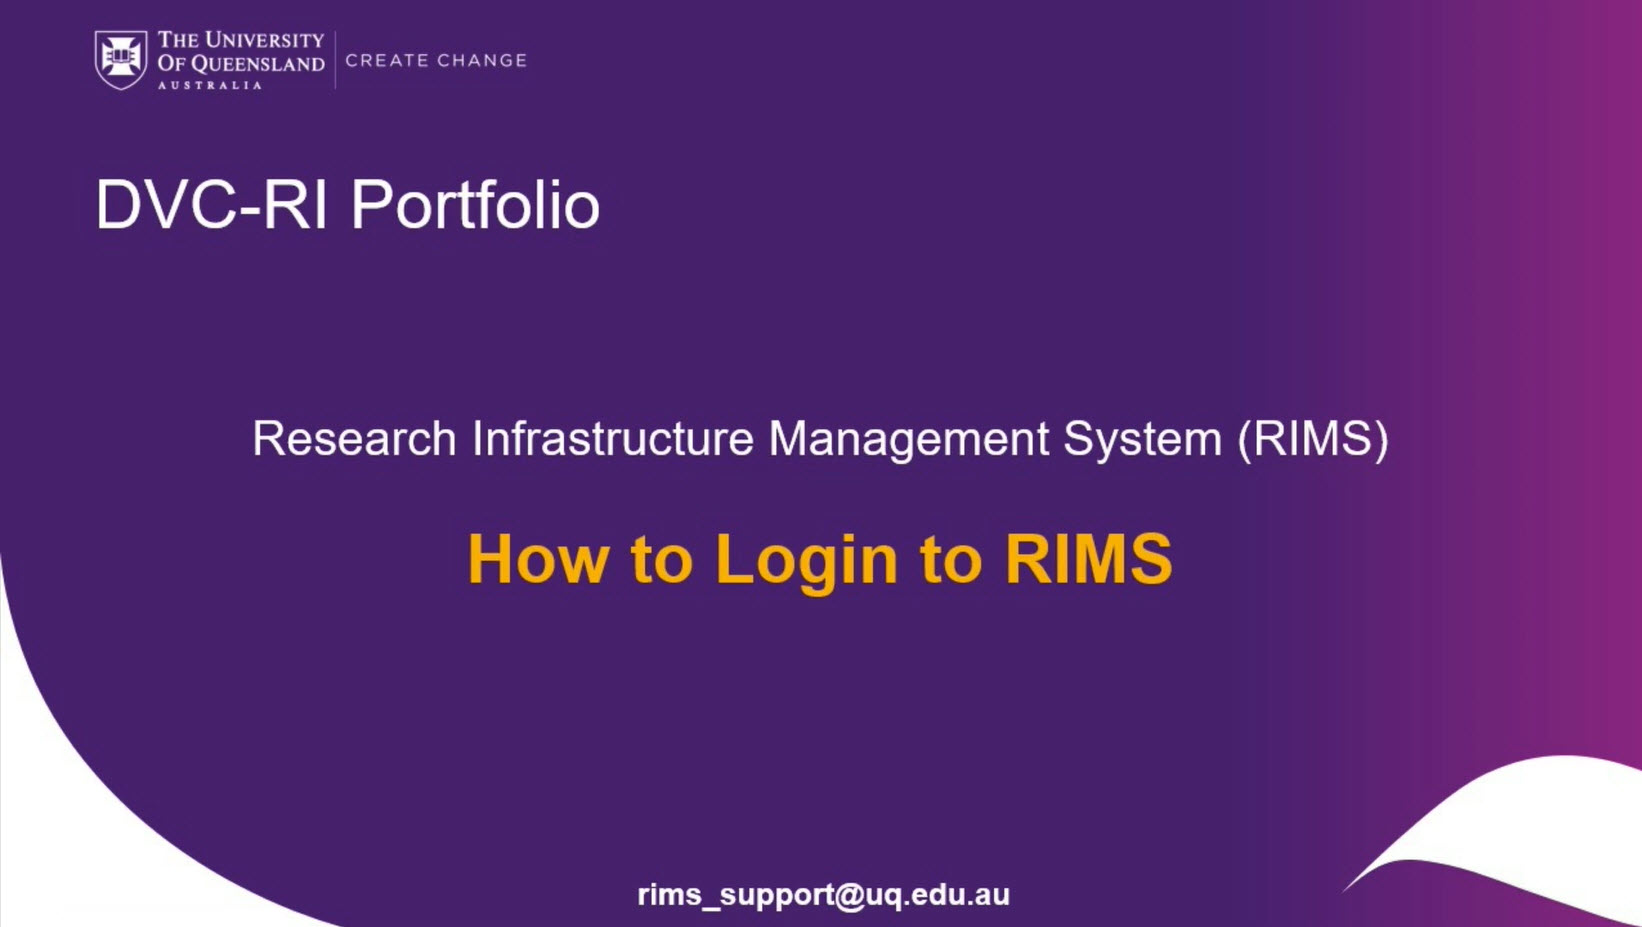 How to log into RIMS